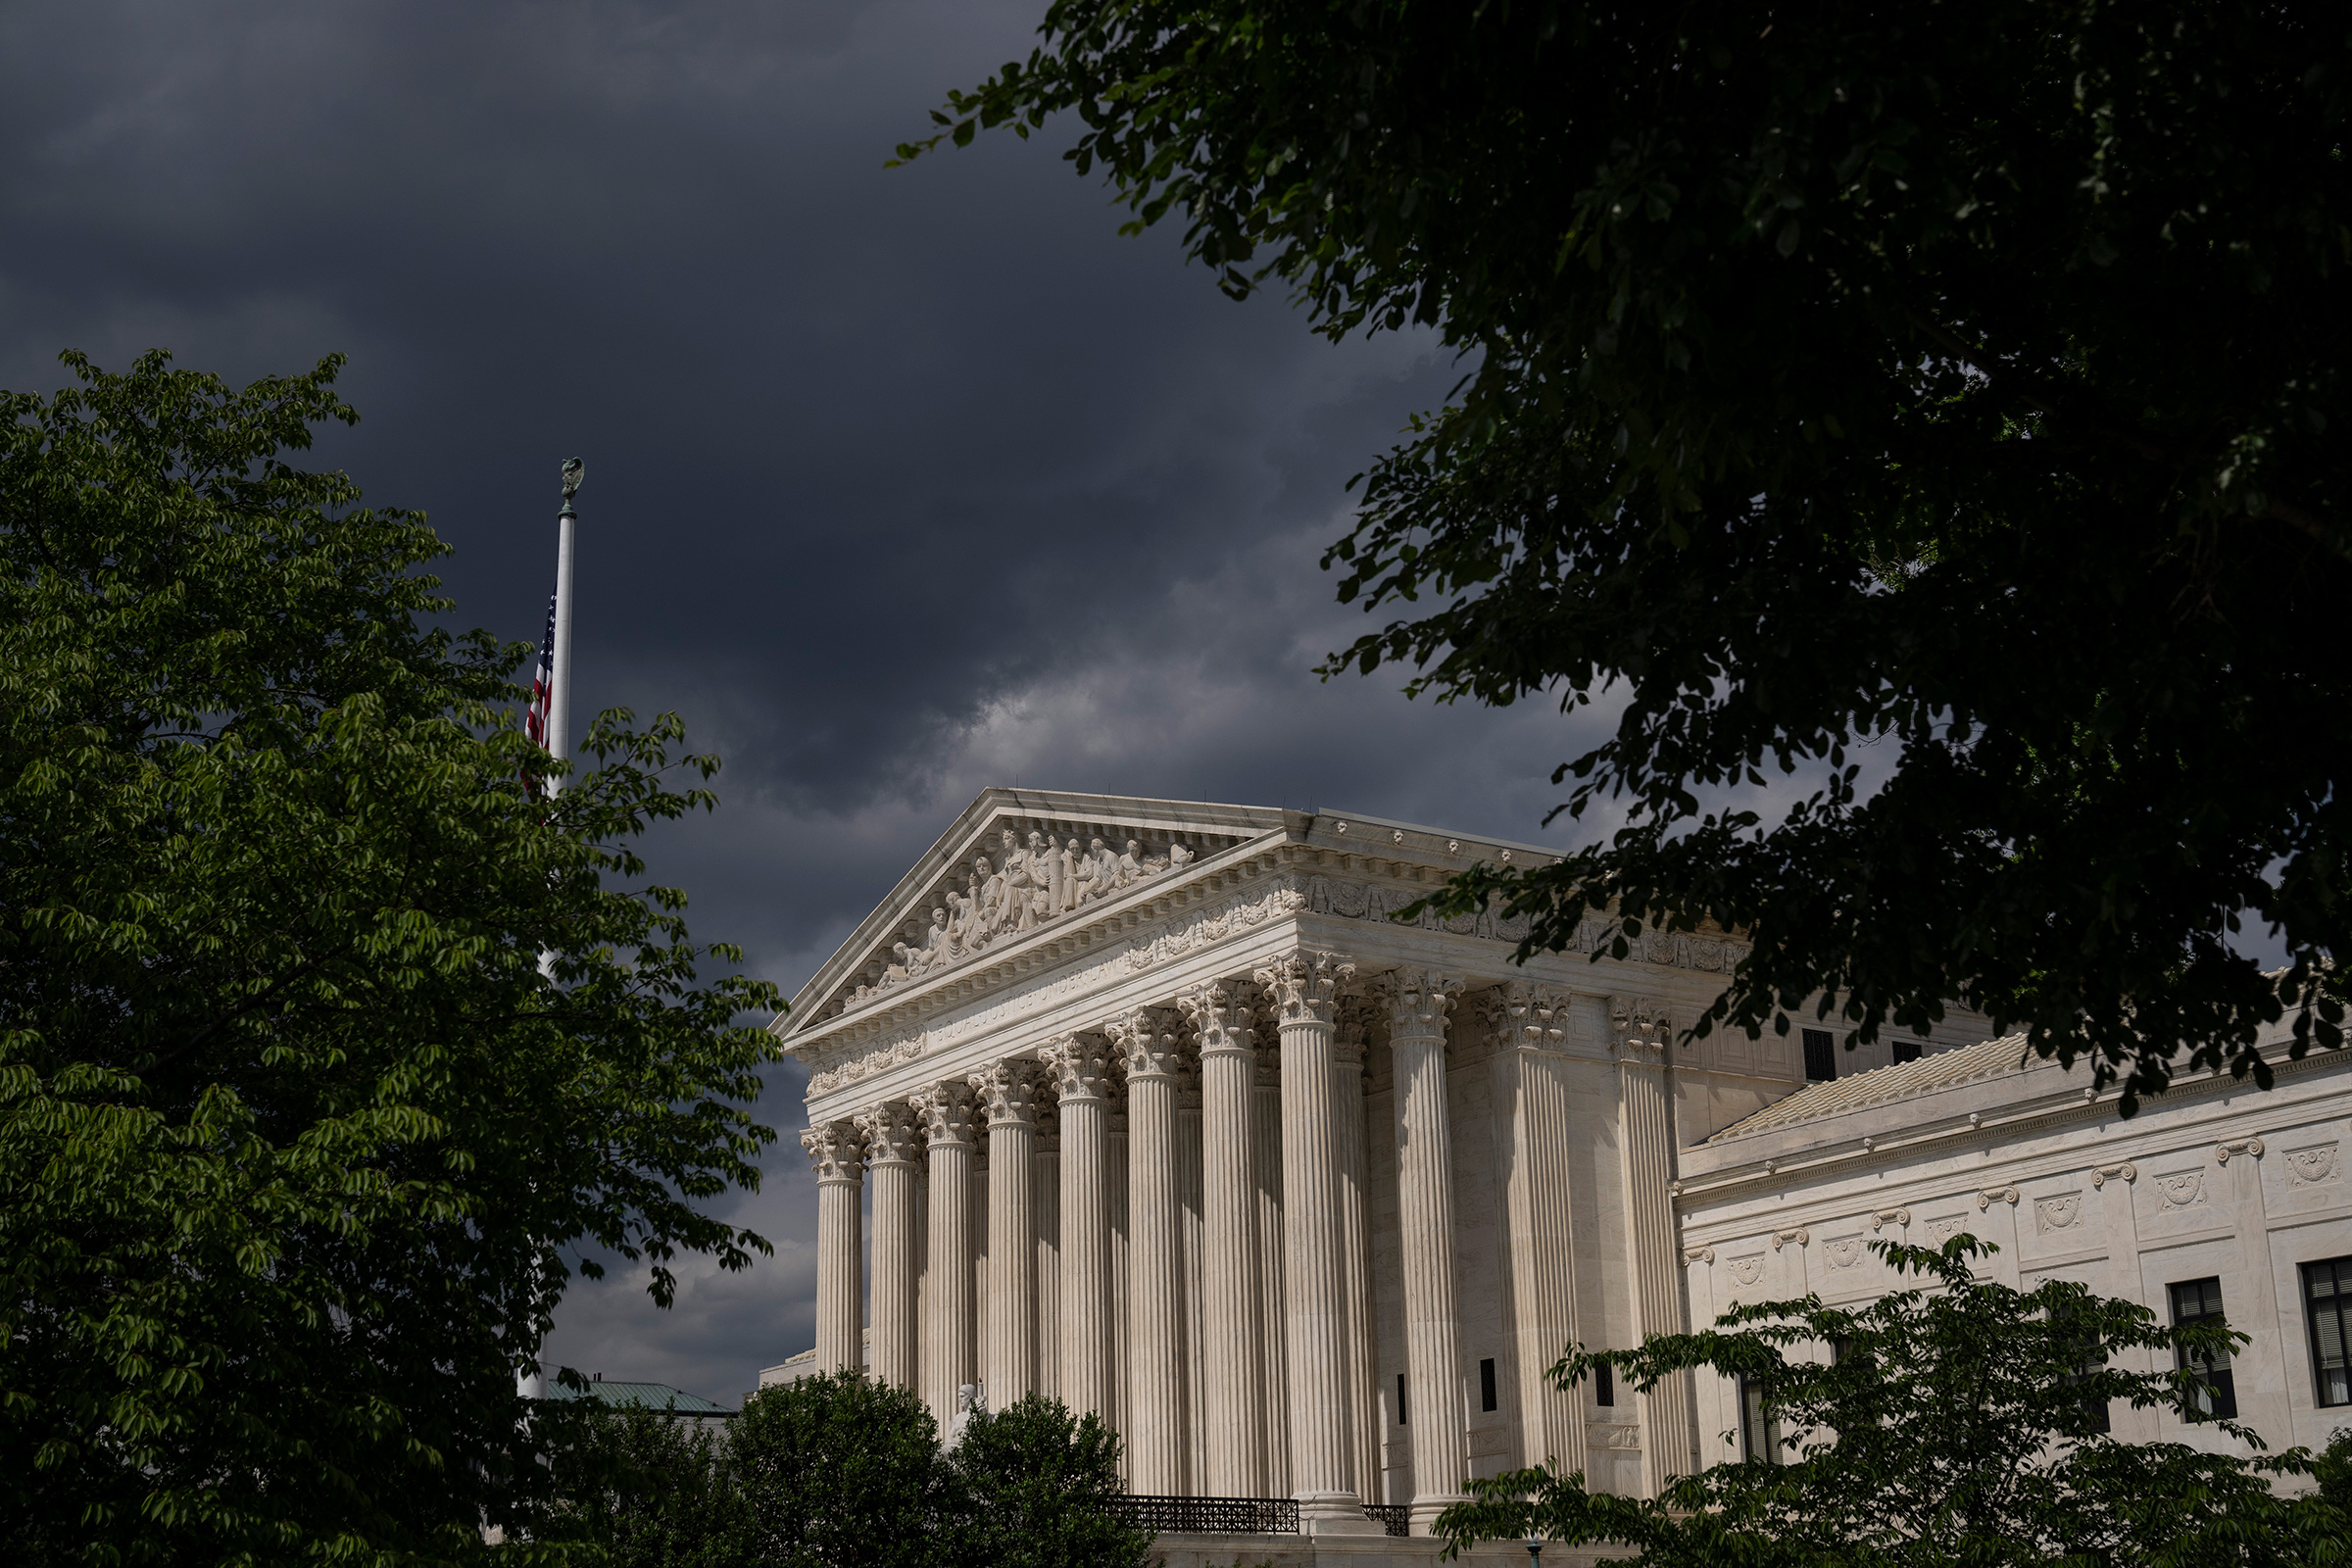 The U.S. Supreme Court building in Washington, D.C., on May 17, 2021. (Drew Angerer—Getty Images)